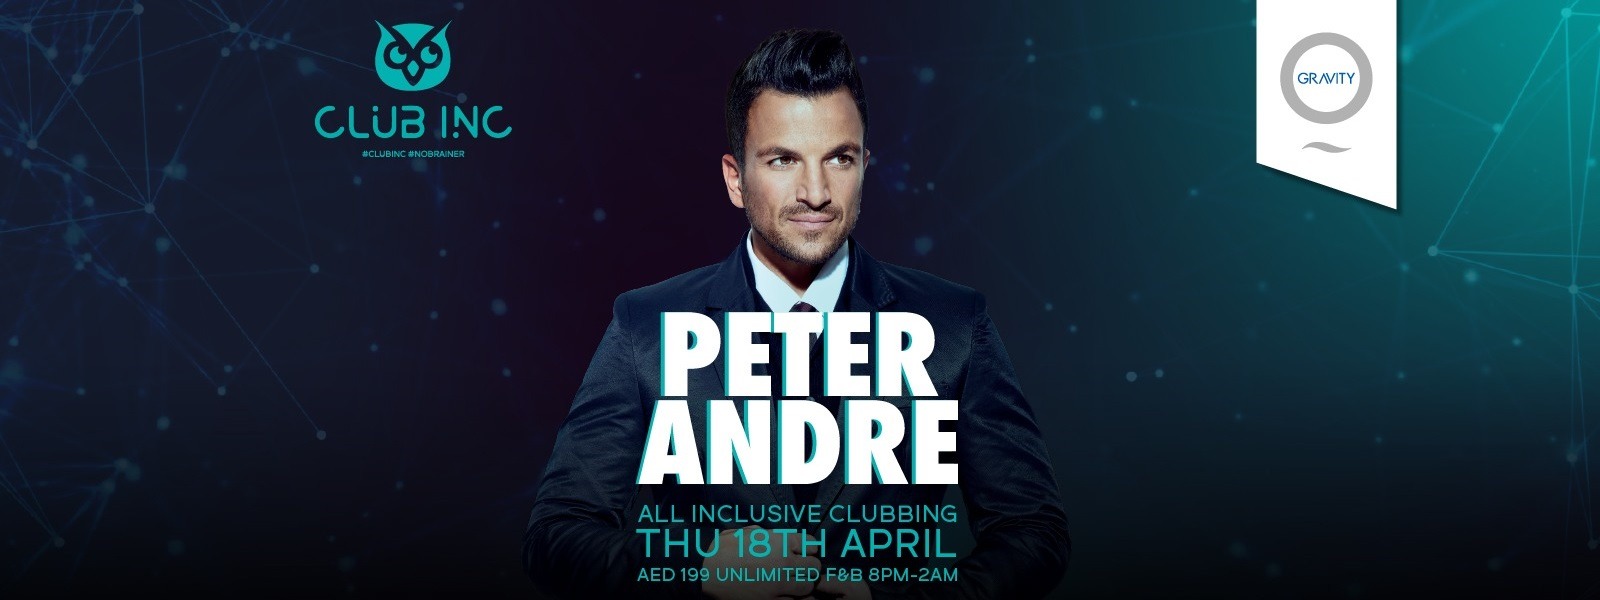 Peter Andre at Zero Gravity - Coming Soon in UAE